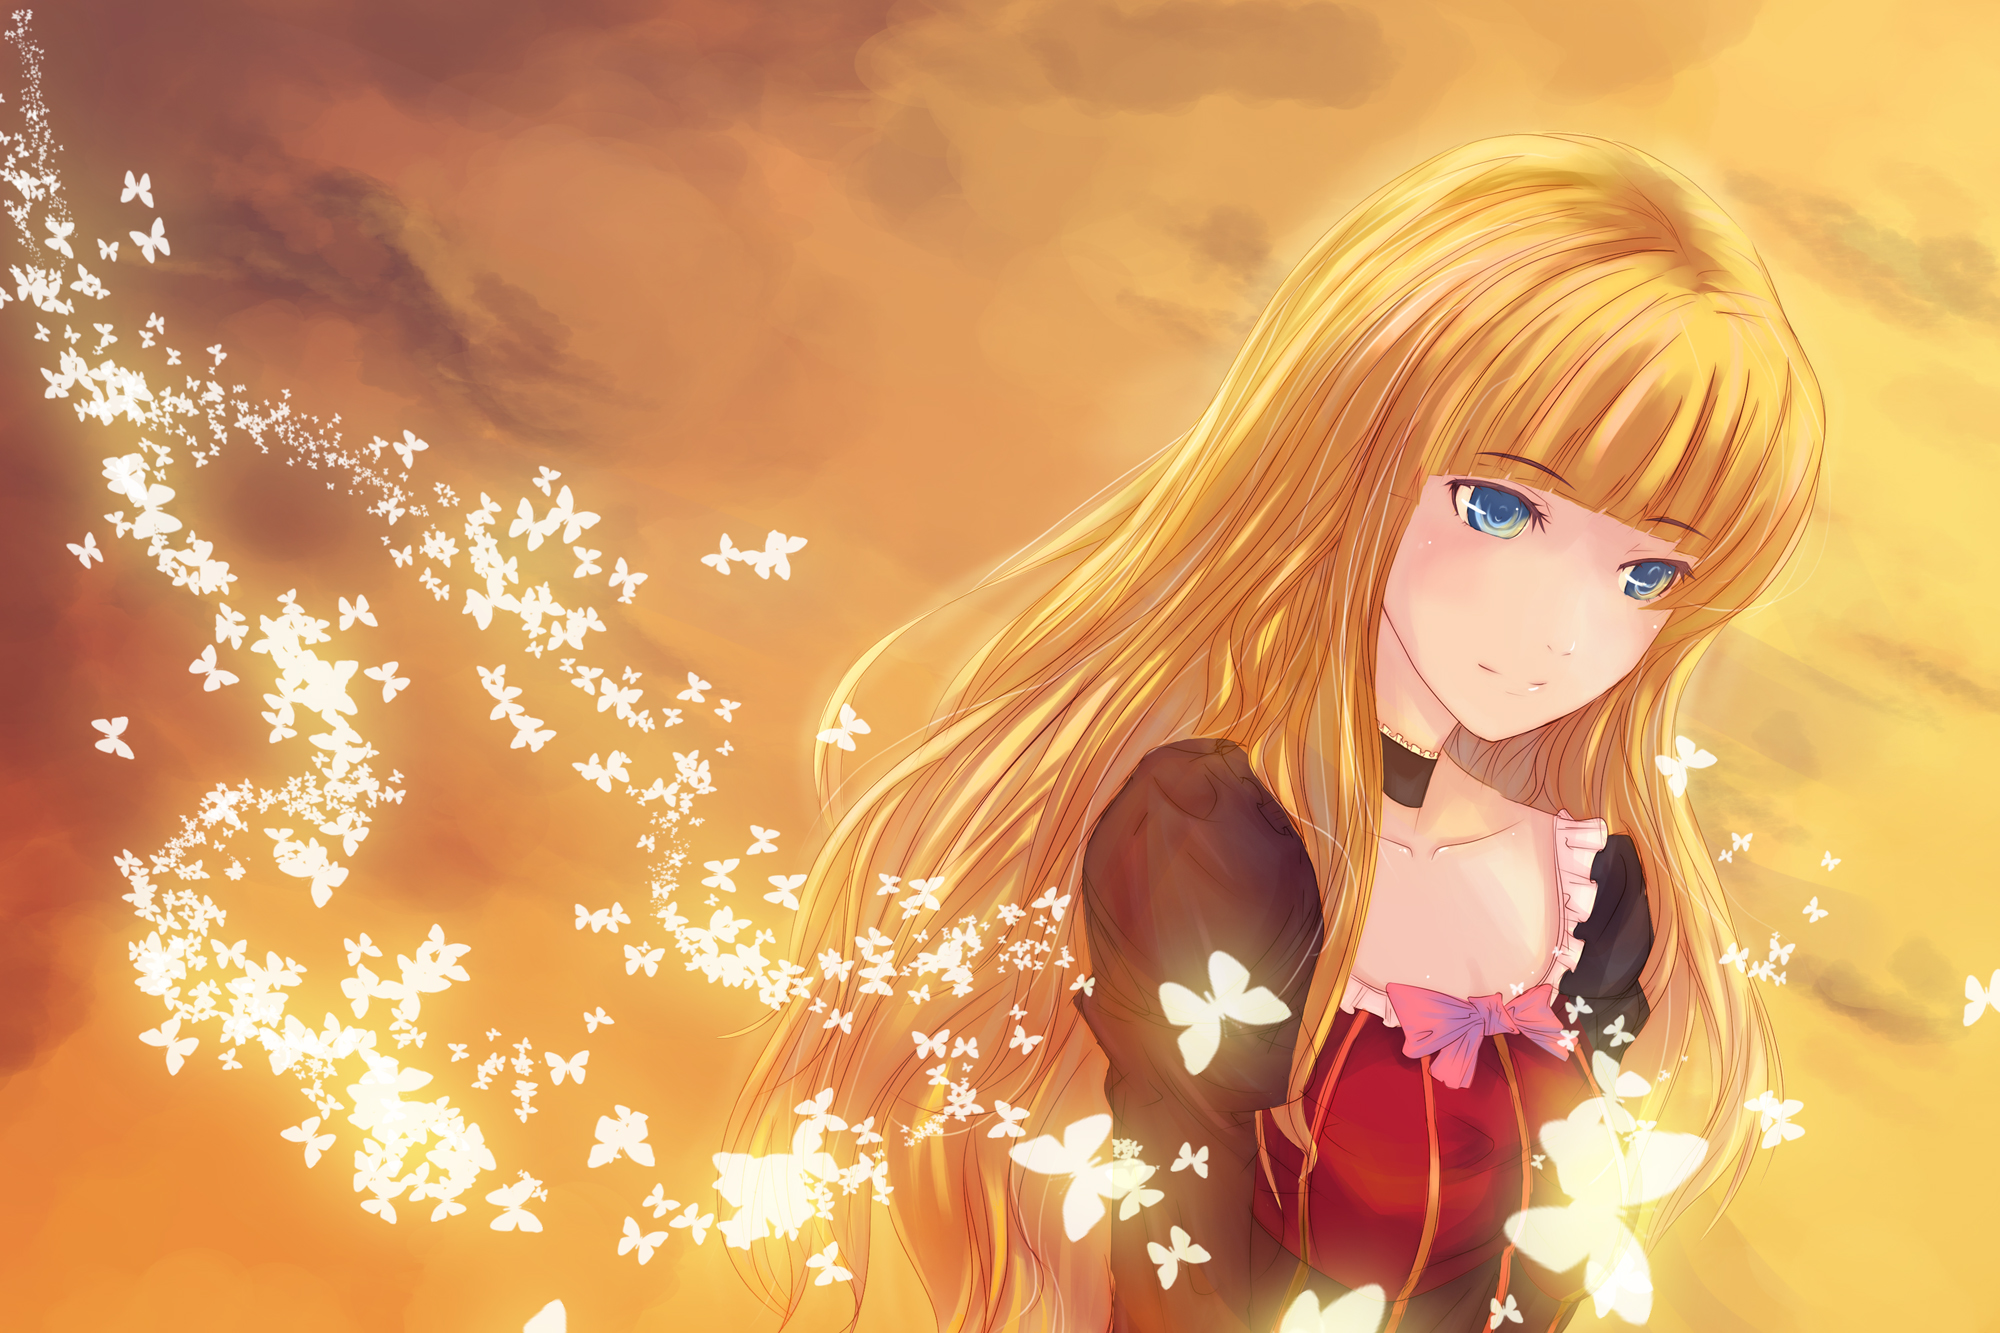 Youthful anime character in Umineko: When They Cry desktop wallpaper.